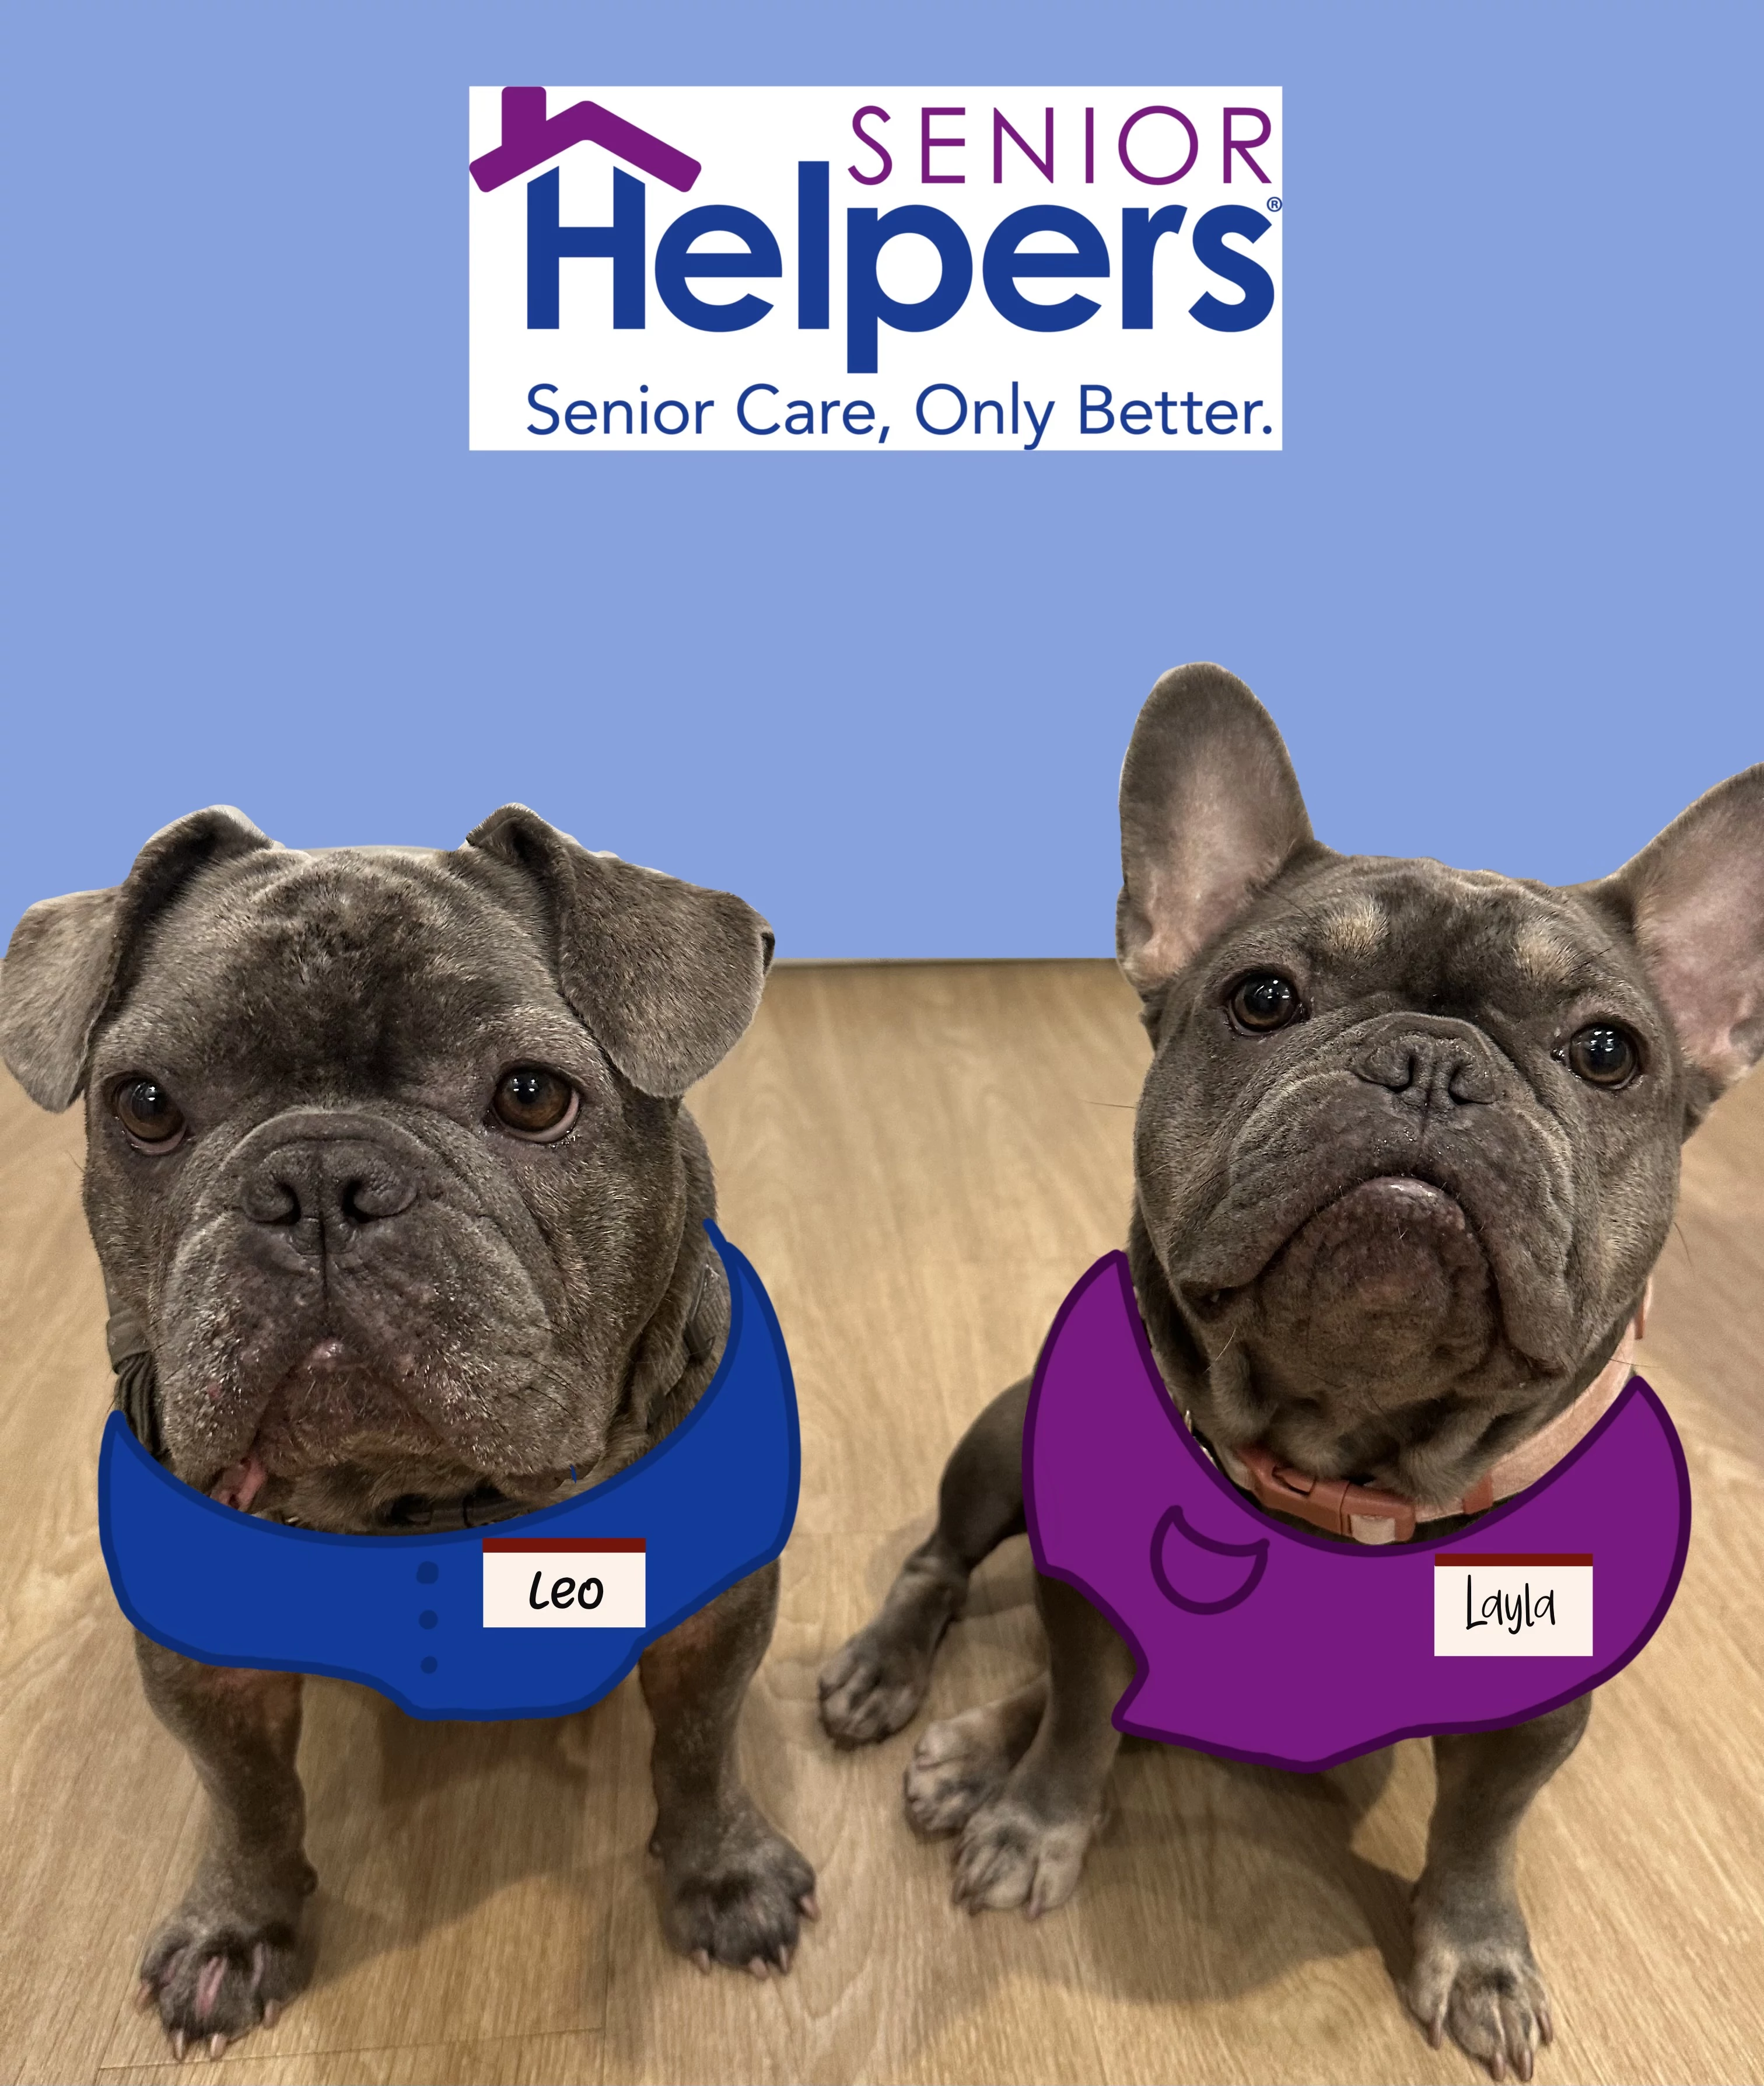 Happy National Dog’s Day from Senior Helpers of South Orange Co.